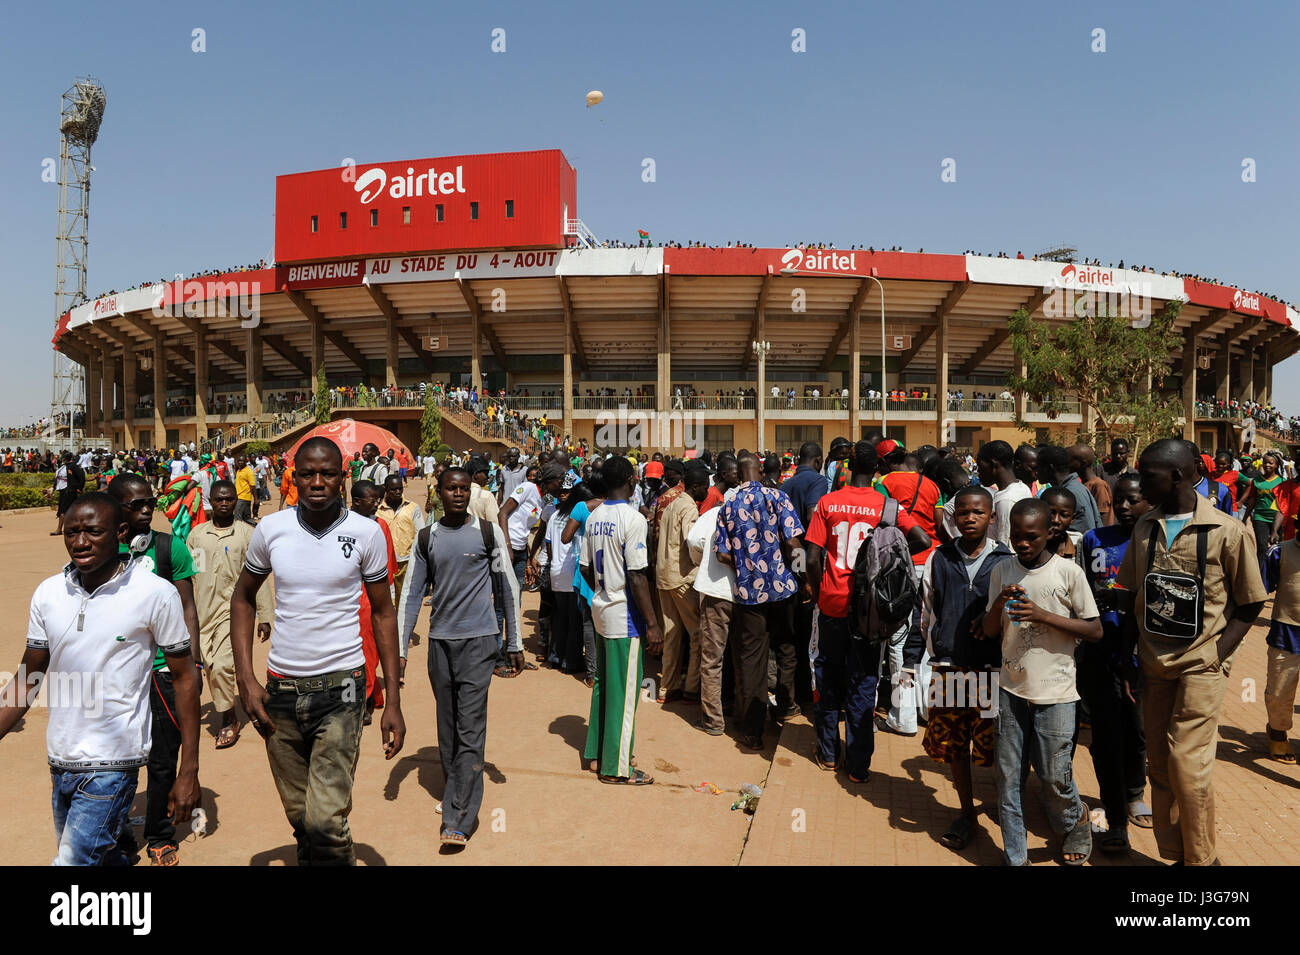 BURKINA FASO, capital Ouagadougou, reception of the national football team of Burkina Faso as 2nd winner of the Africa Cup 2013 in Stadium in Ougadougou, sponsoring and advertisement by mobile phone company Airtel Stock Photo